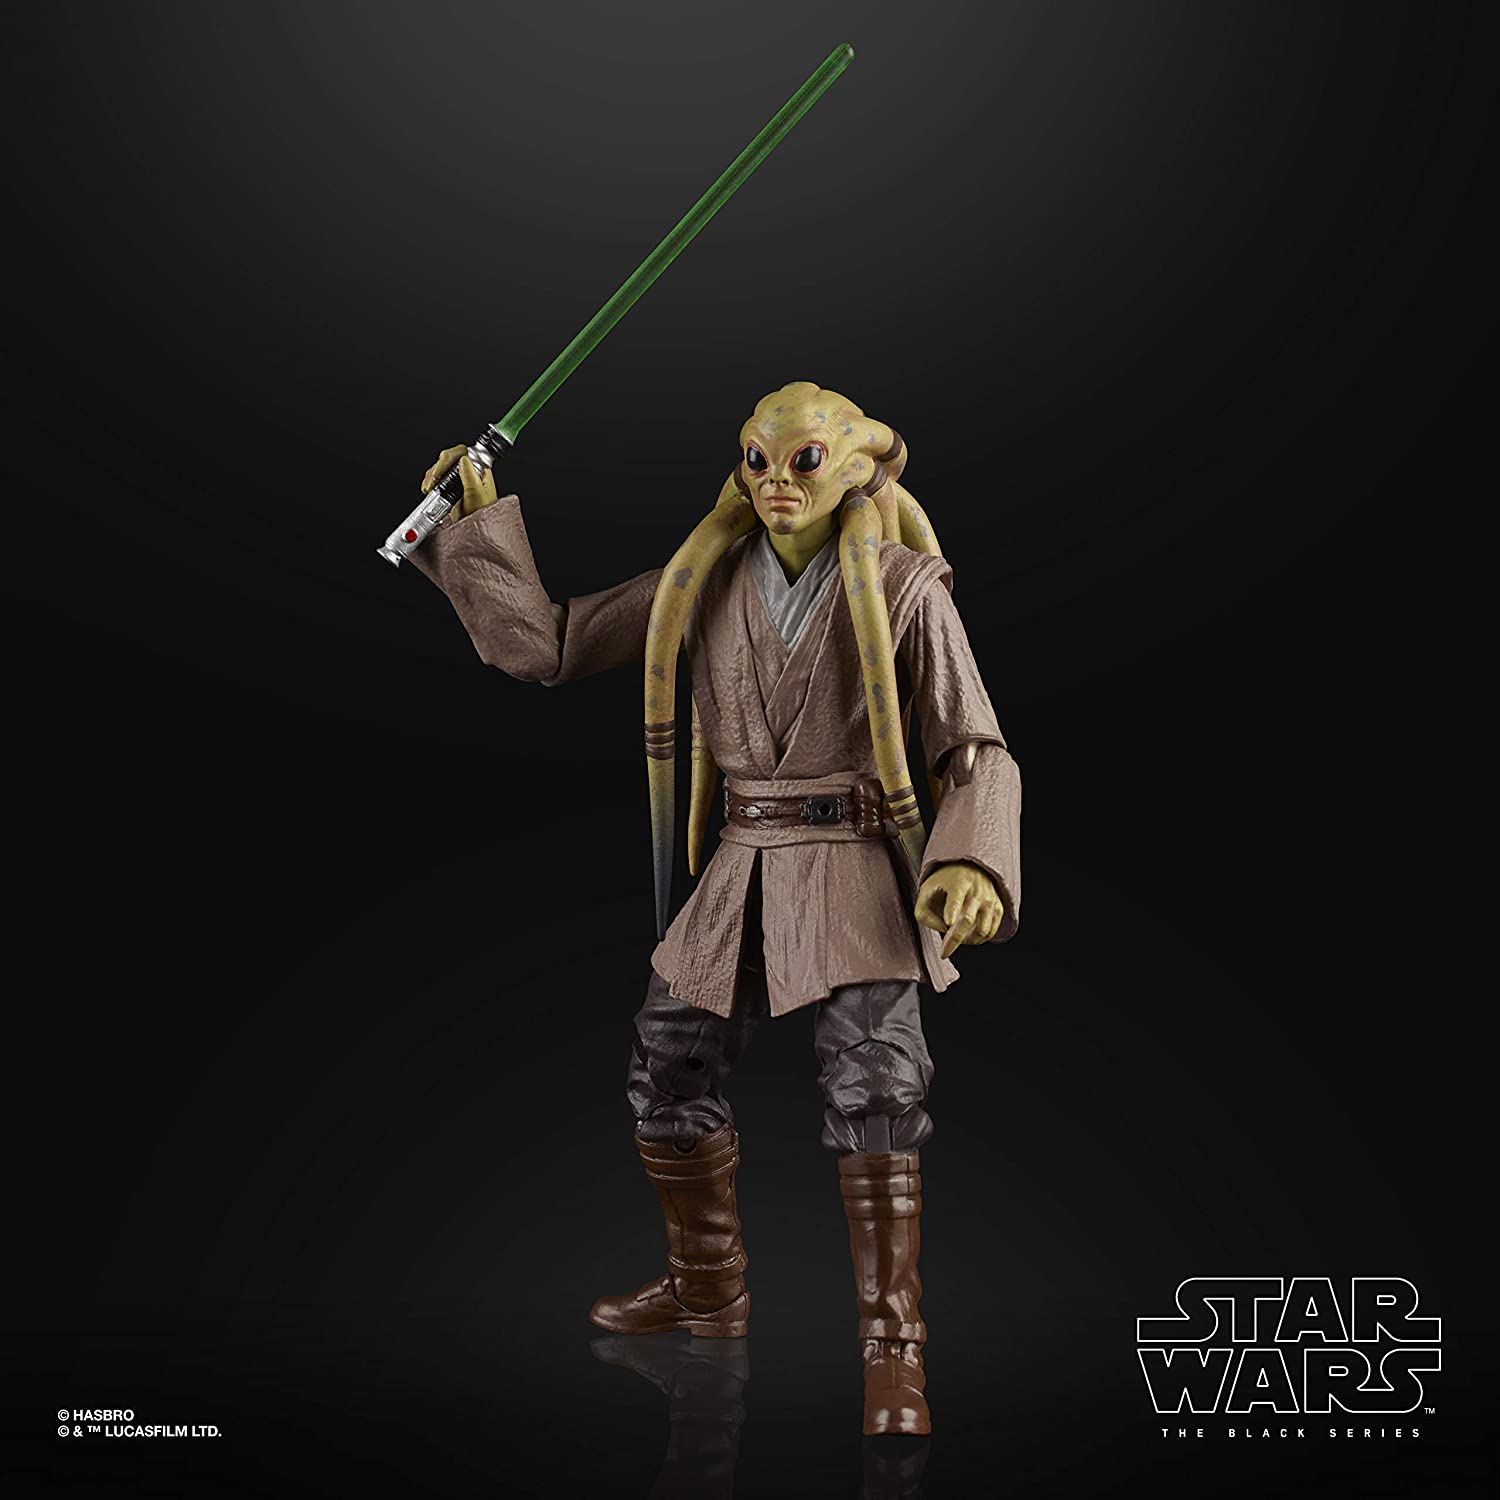 STAR WARS The Black Series Kit Fisto Toy 6 Scale The Clone Wars Collectible Action Figure: Toys & Games